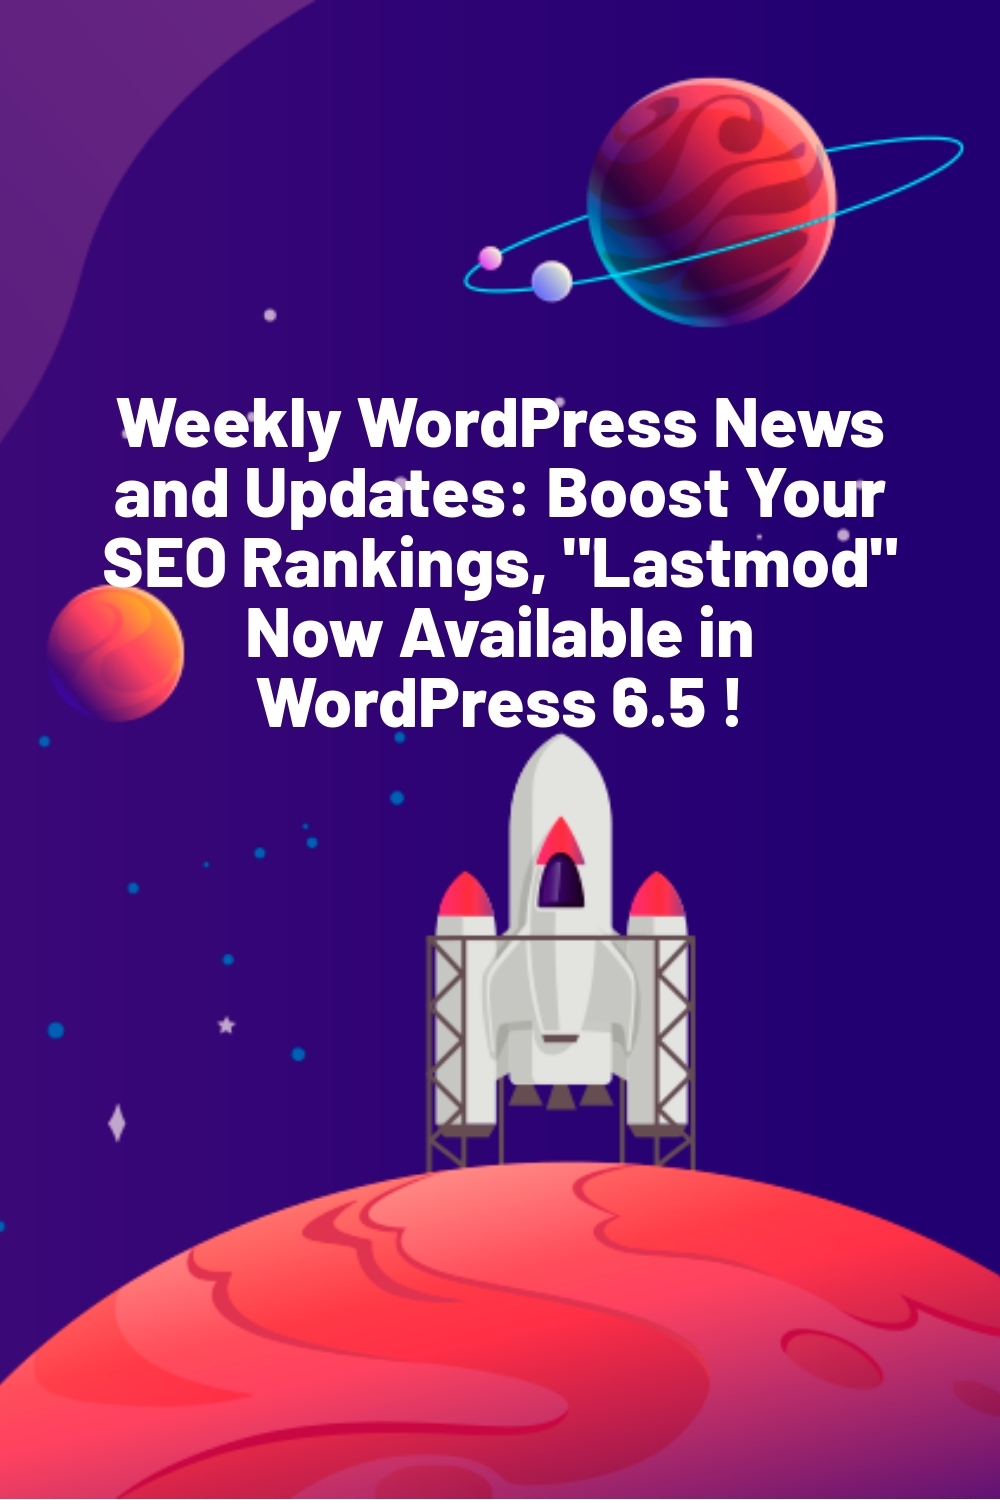 Weekly WordPress News and Updates: Boost Your SEO Rankings, “Lastmod” Now Available in WordPress 6.5 !